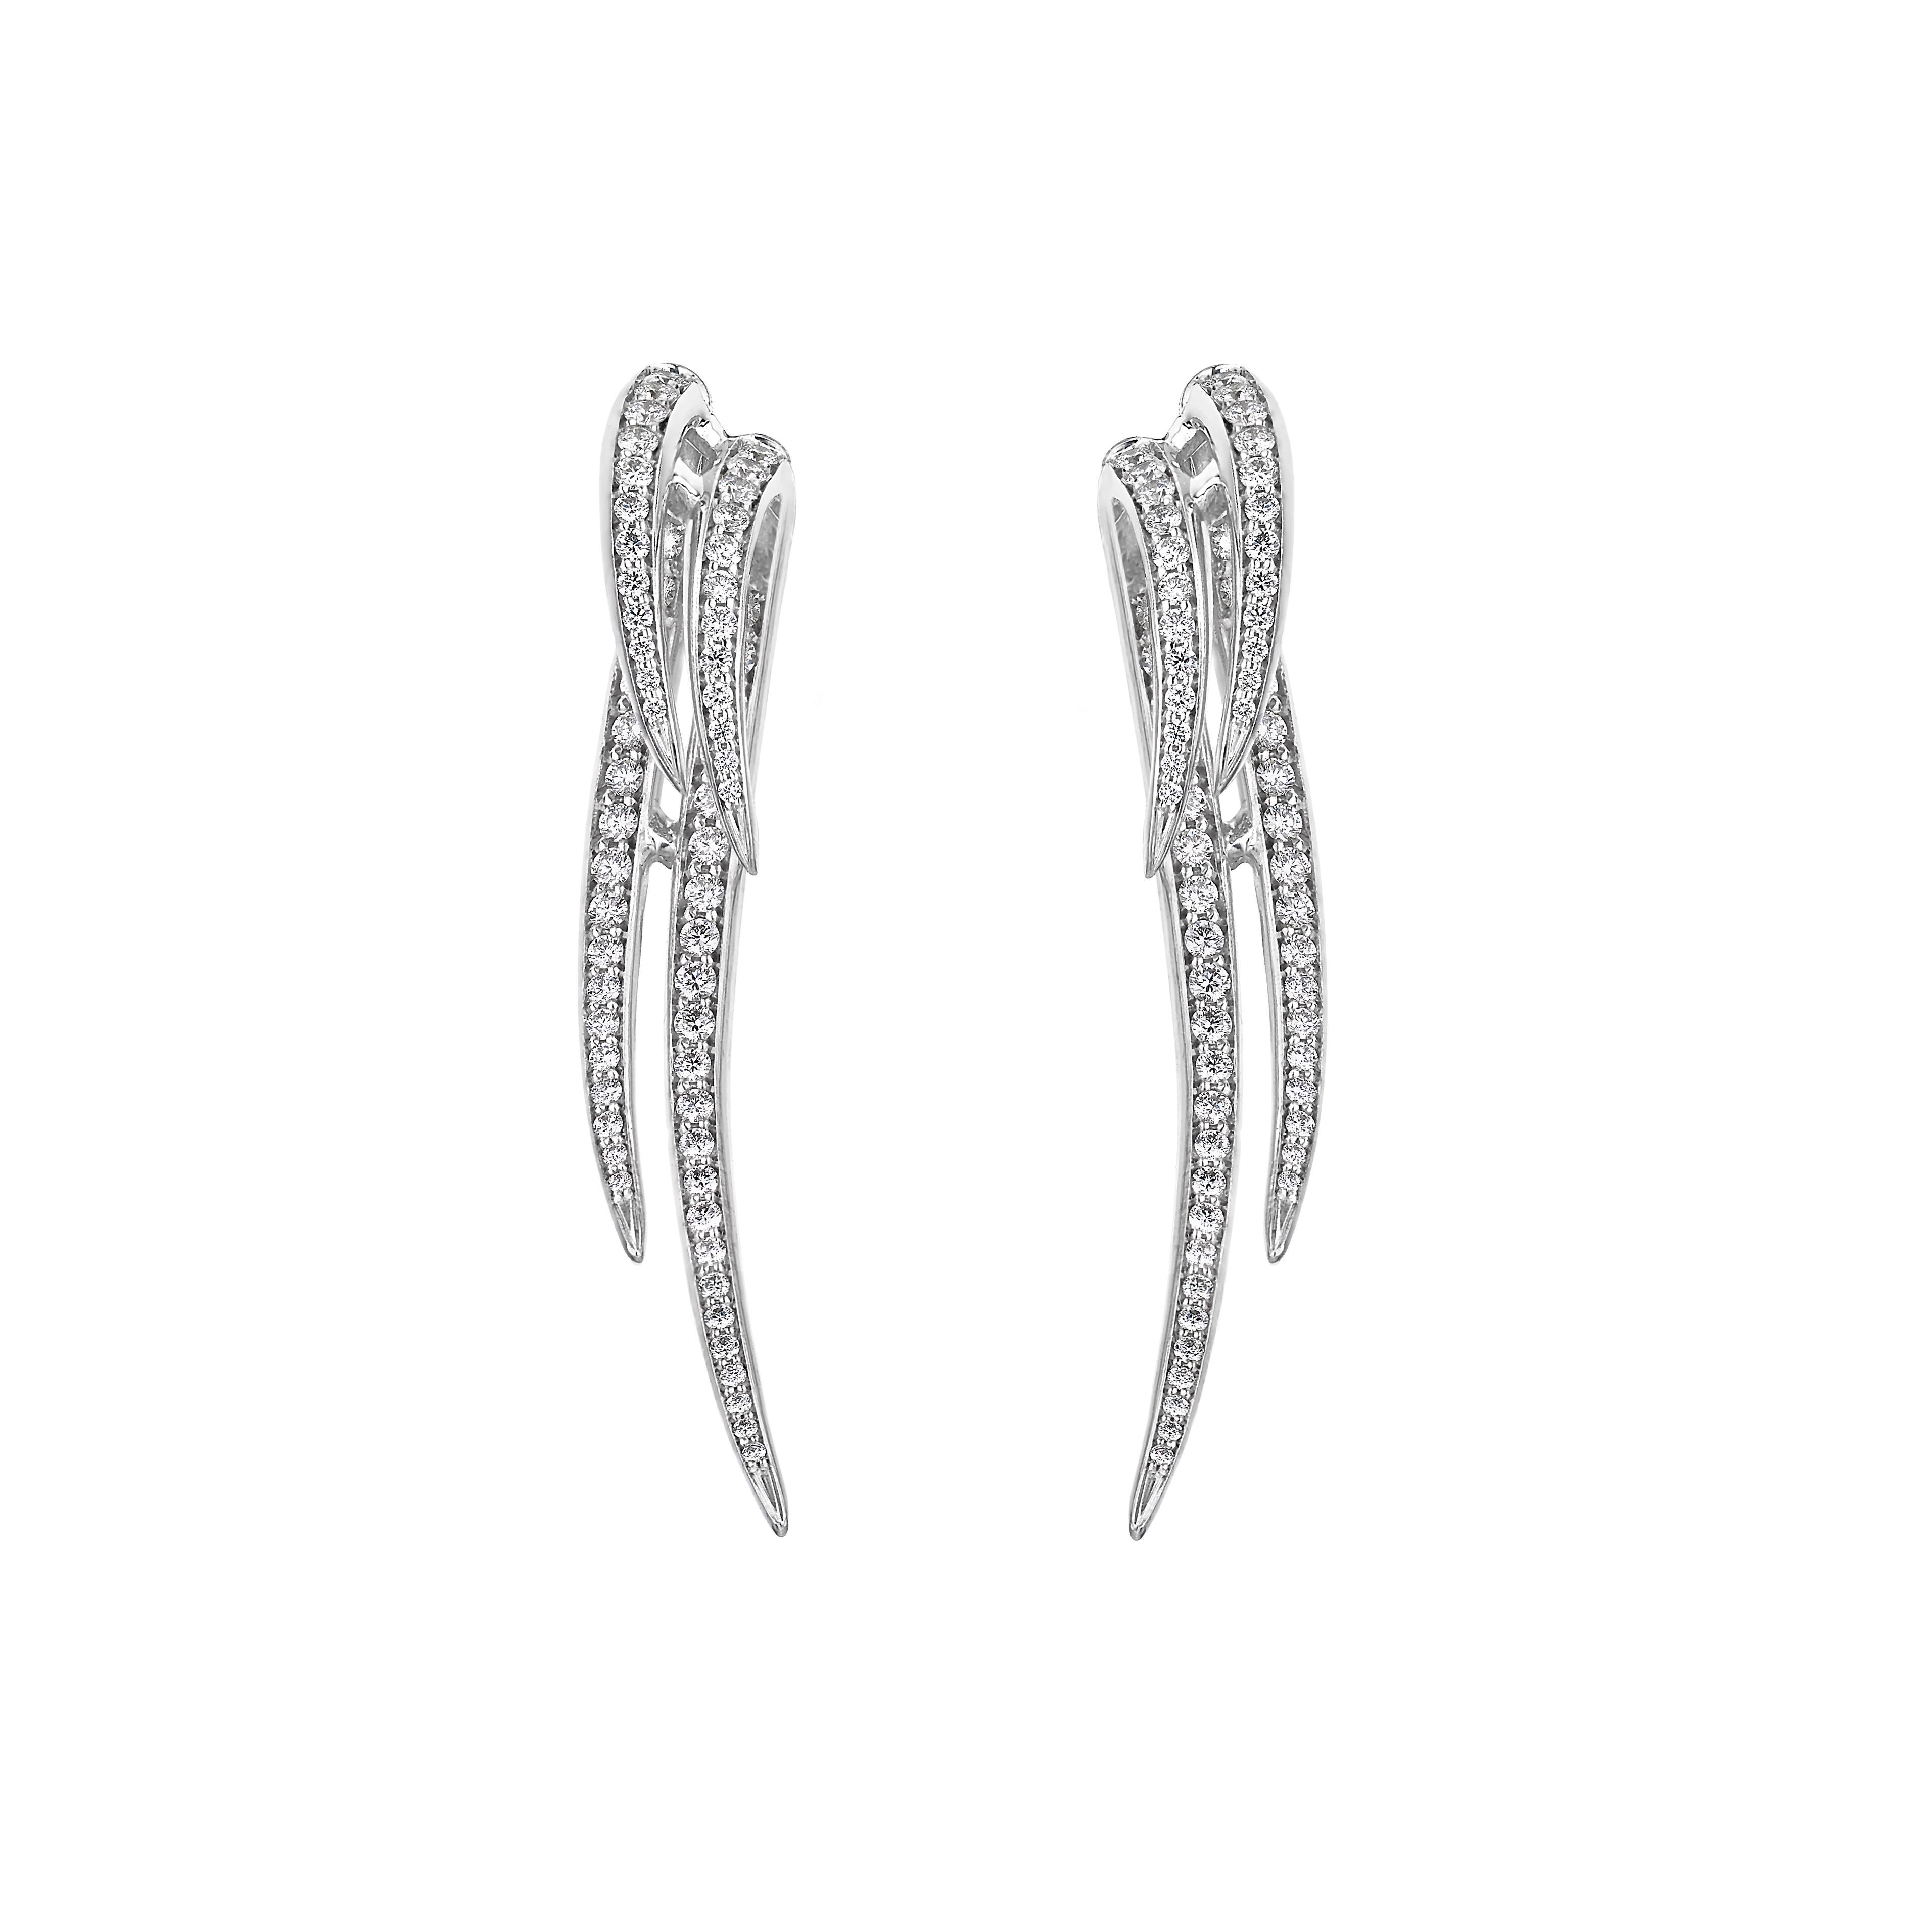 Crafted from 18ct white gold and 1.40cts of brilliant white diamonds, Armis Double Hook Earrings balance symmetry with perfect proportions. A waterfall of diamond pavé creates a sense of light and movement, framing the jawline beautifully. Infused